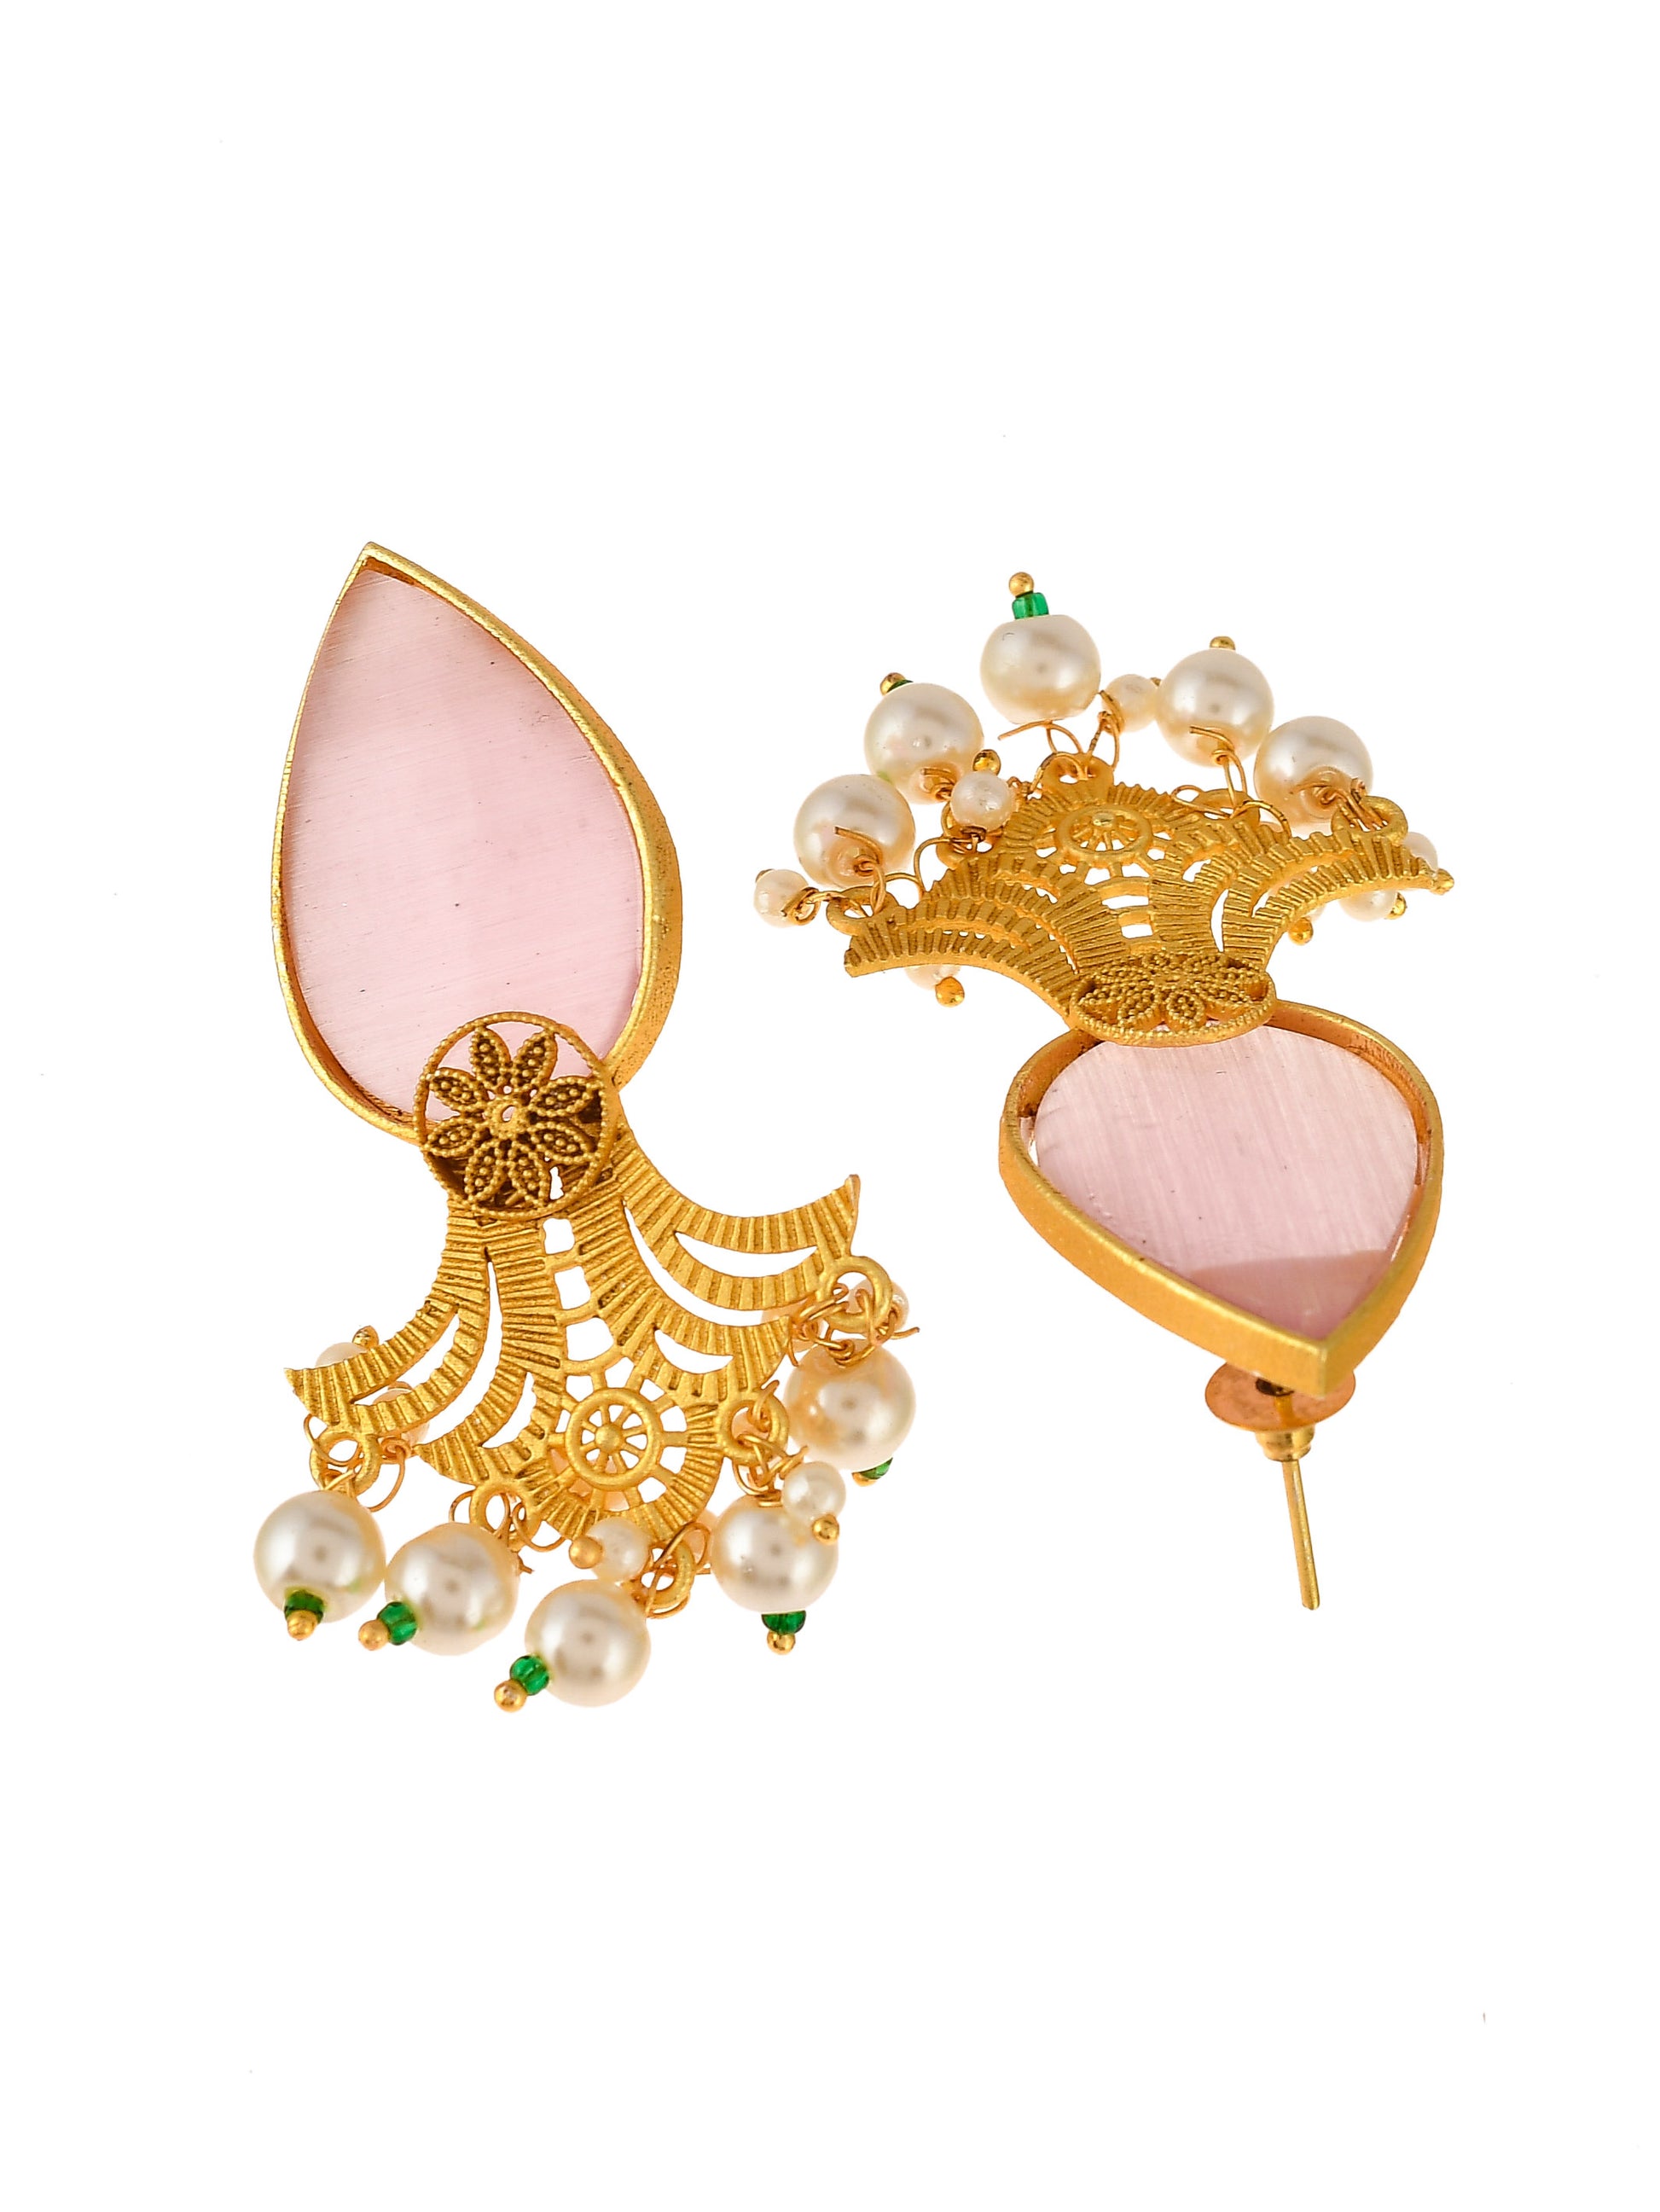 Gold-Toned Contemporary Jhumkas Earrings